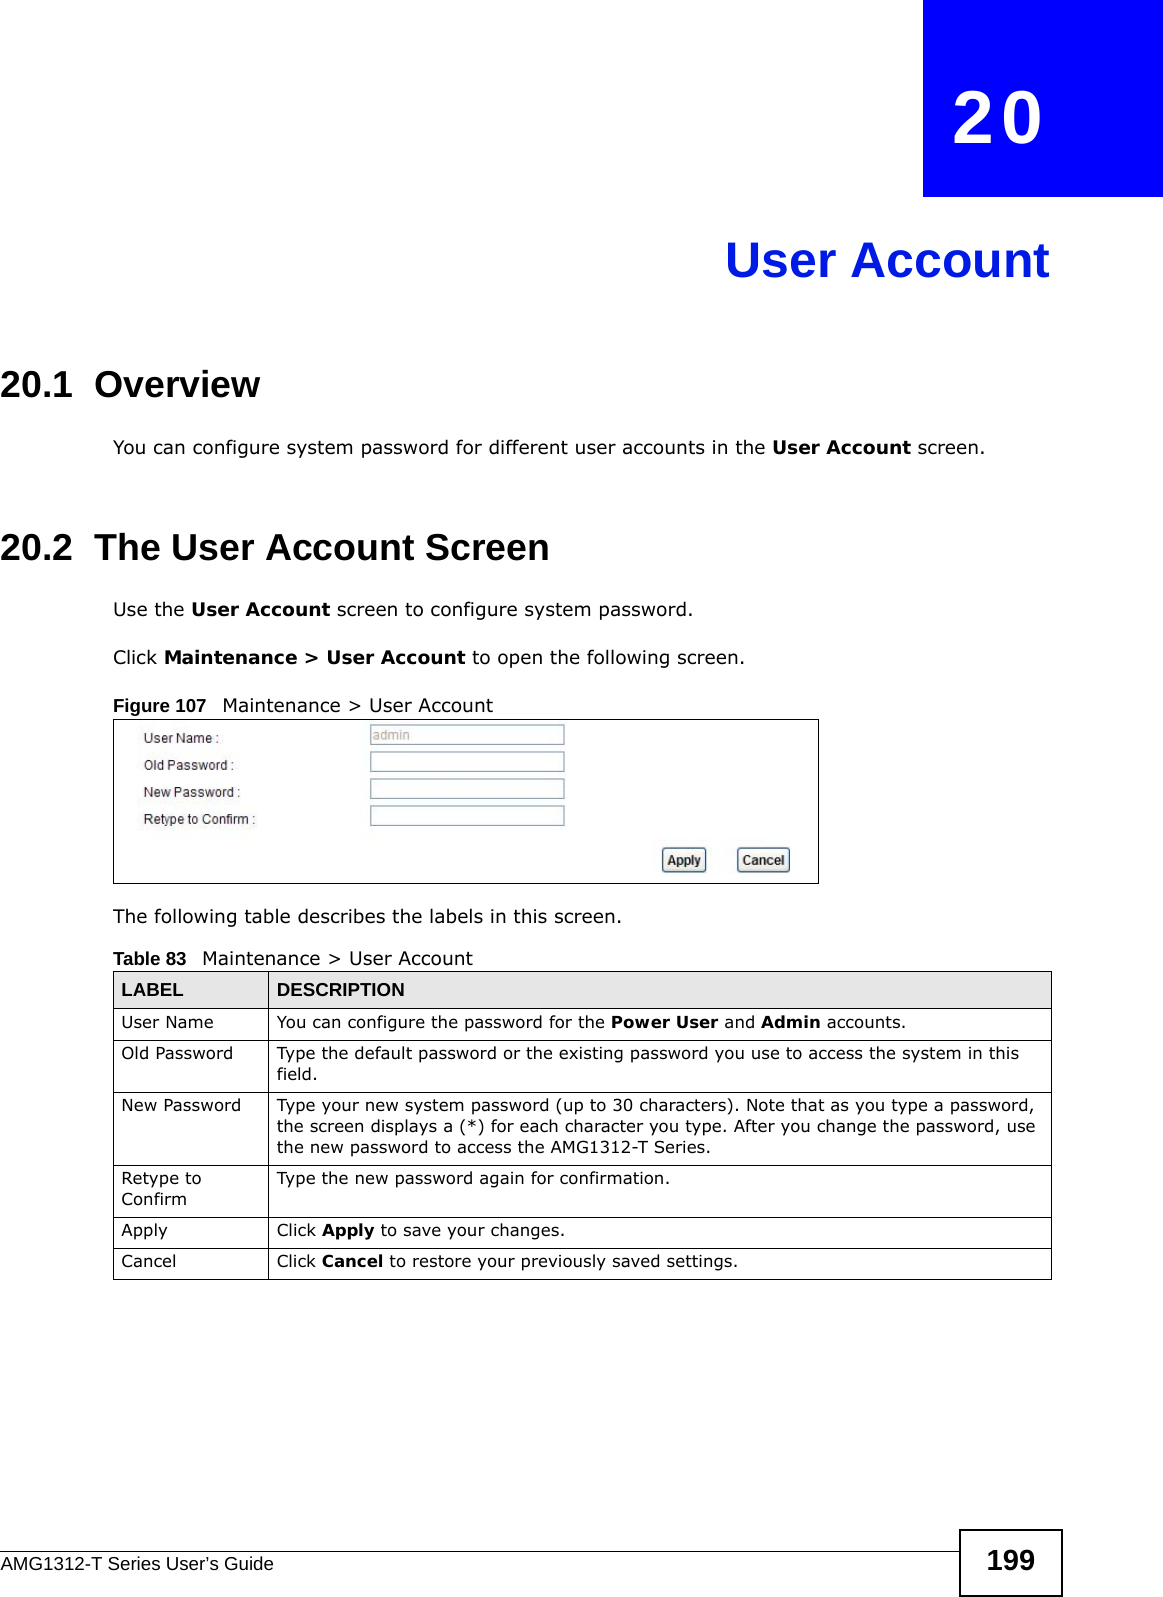 AMG1312-T Series User’s Guide 199CHAPTER   20User Account20.1  Overview You can configure system password for different user accounts in the User Account screen.20.2  The User Account ScreenUse the User Account screen to configure system password.Click Maintenance &gt; User Account to open the following screen. Figure 107   Maintenance &gt; User AccountThe following table describes the labels in this screen. Table 83   Maintenance &gt; User AccountLABEL DESCRIPTIONUser Name You can configure the password for the Power User and Admin accounts.Old Password Type the default password or the existing password you use to access the system in this field.New Password Type your new system password (up to 30 characters). Note that as you type a password, the screen displays a (*) for each character you type. After you change the password, use the new password to access the AMG1312-T Series.Retype to ConfirmType the new password again for confirmation.Apply Click Apply to save your changes.Cancel Click Cancel to restore your previously saved settings.